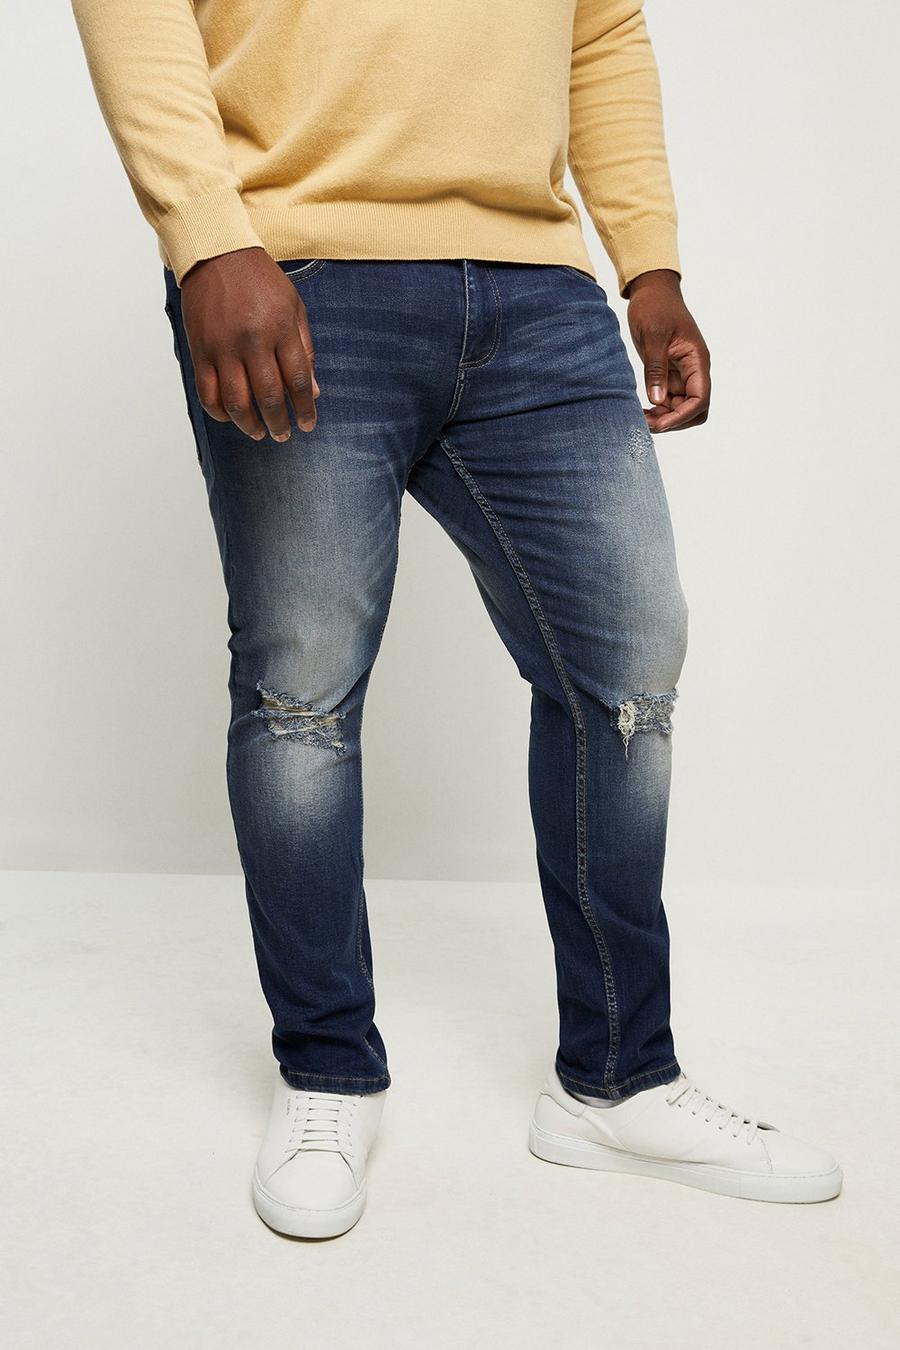 Plus And Tall Skinny Mid Blue Rip Jeans